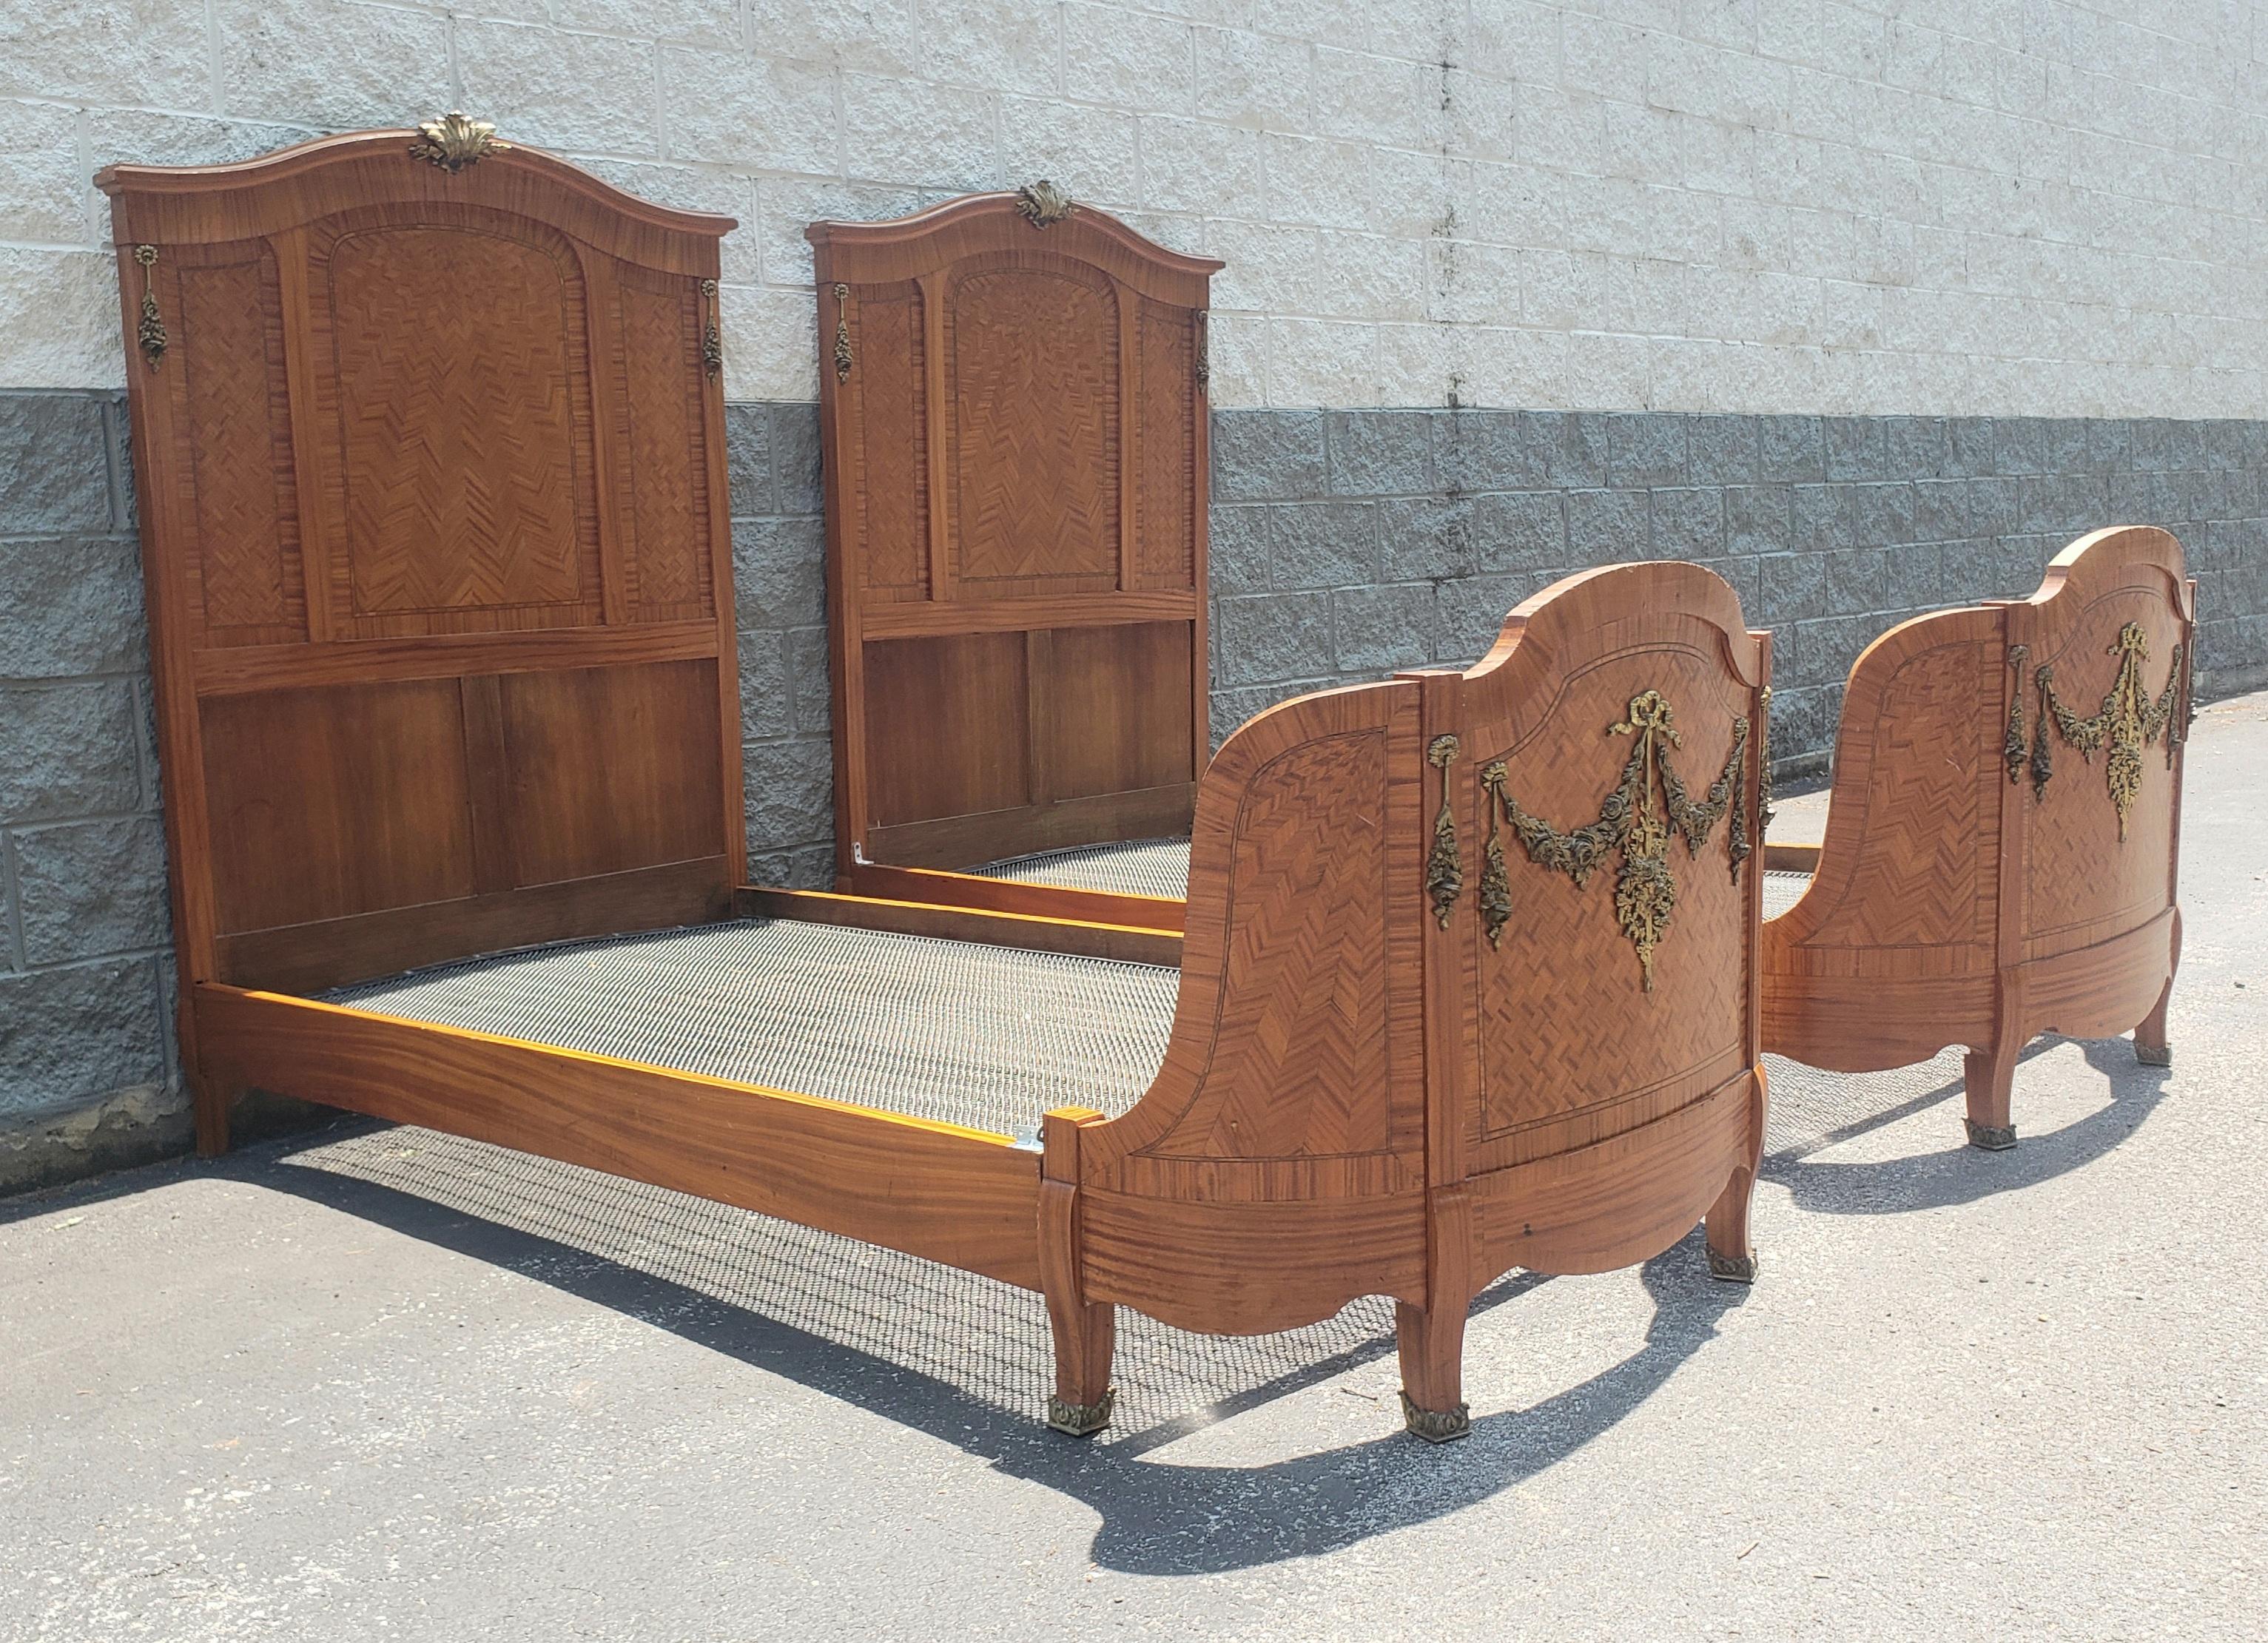 Rococo Revival 1870s Dutch Rococo Style Fruitwood and Satinwood Inlaid & Ormolu Bedsteads, Pair For Sale